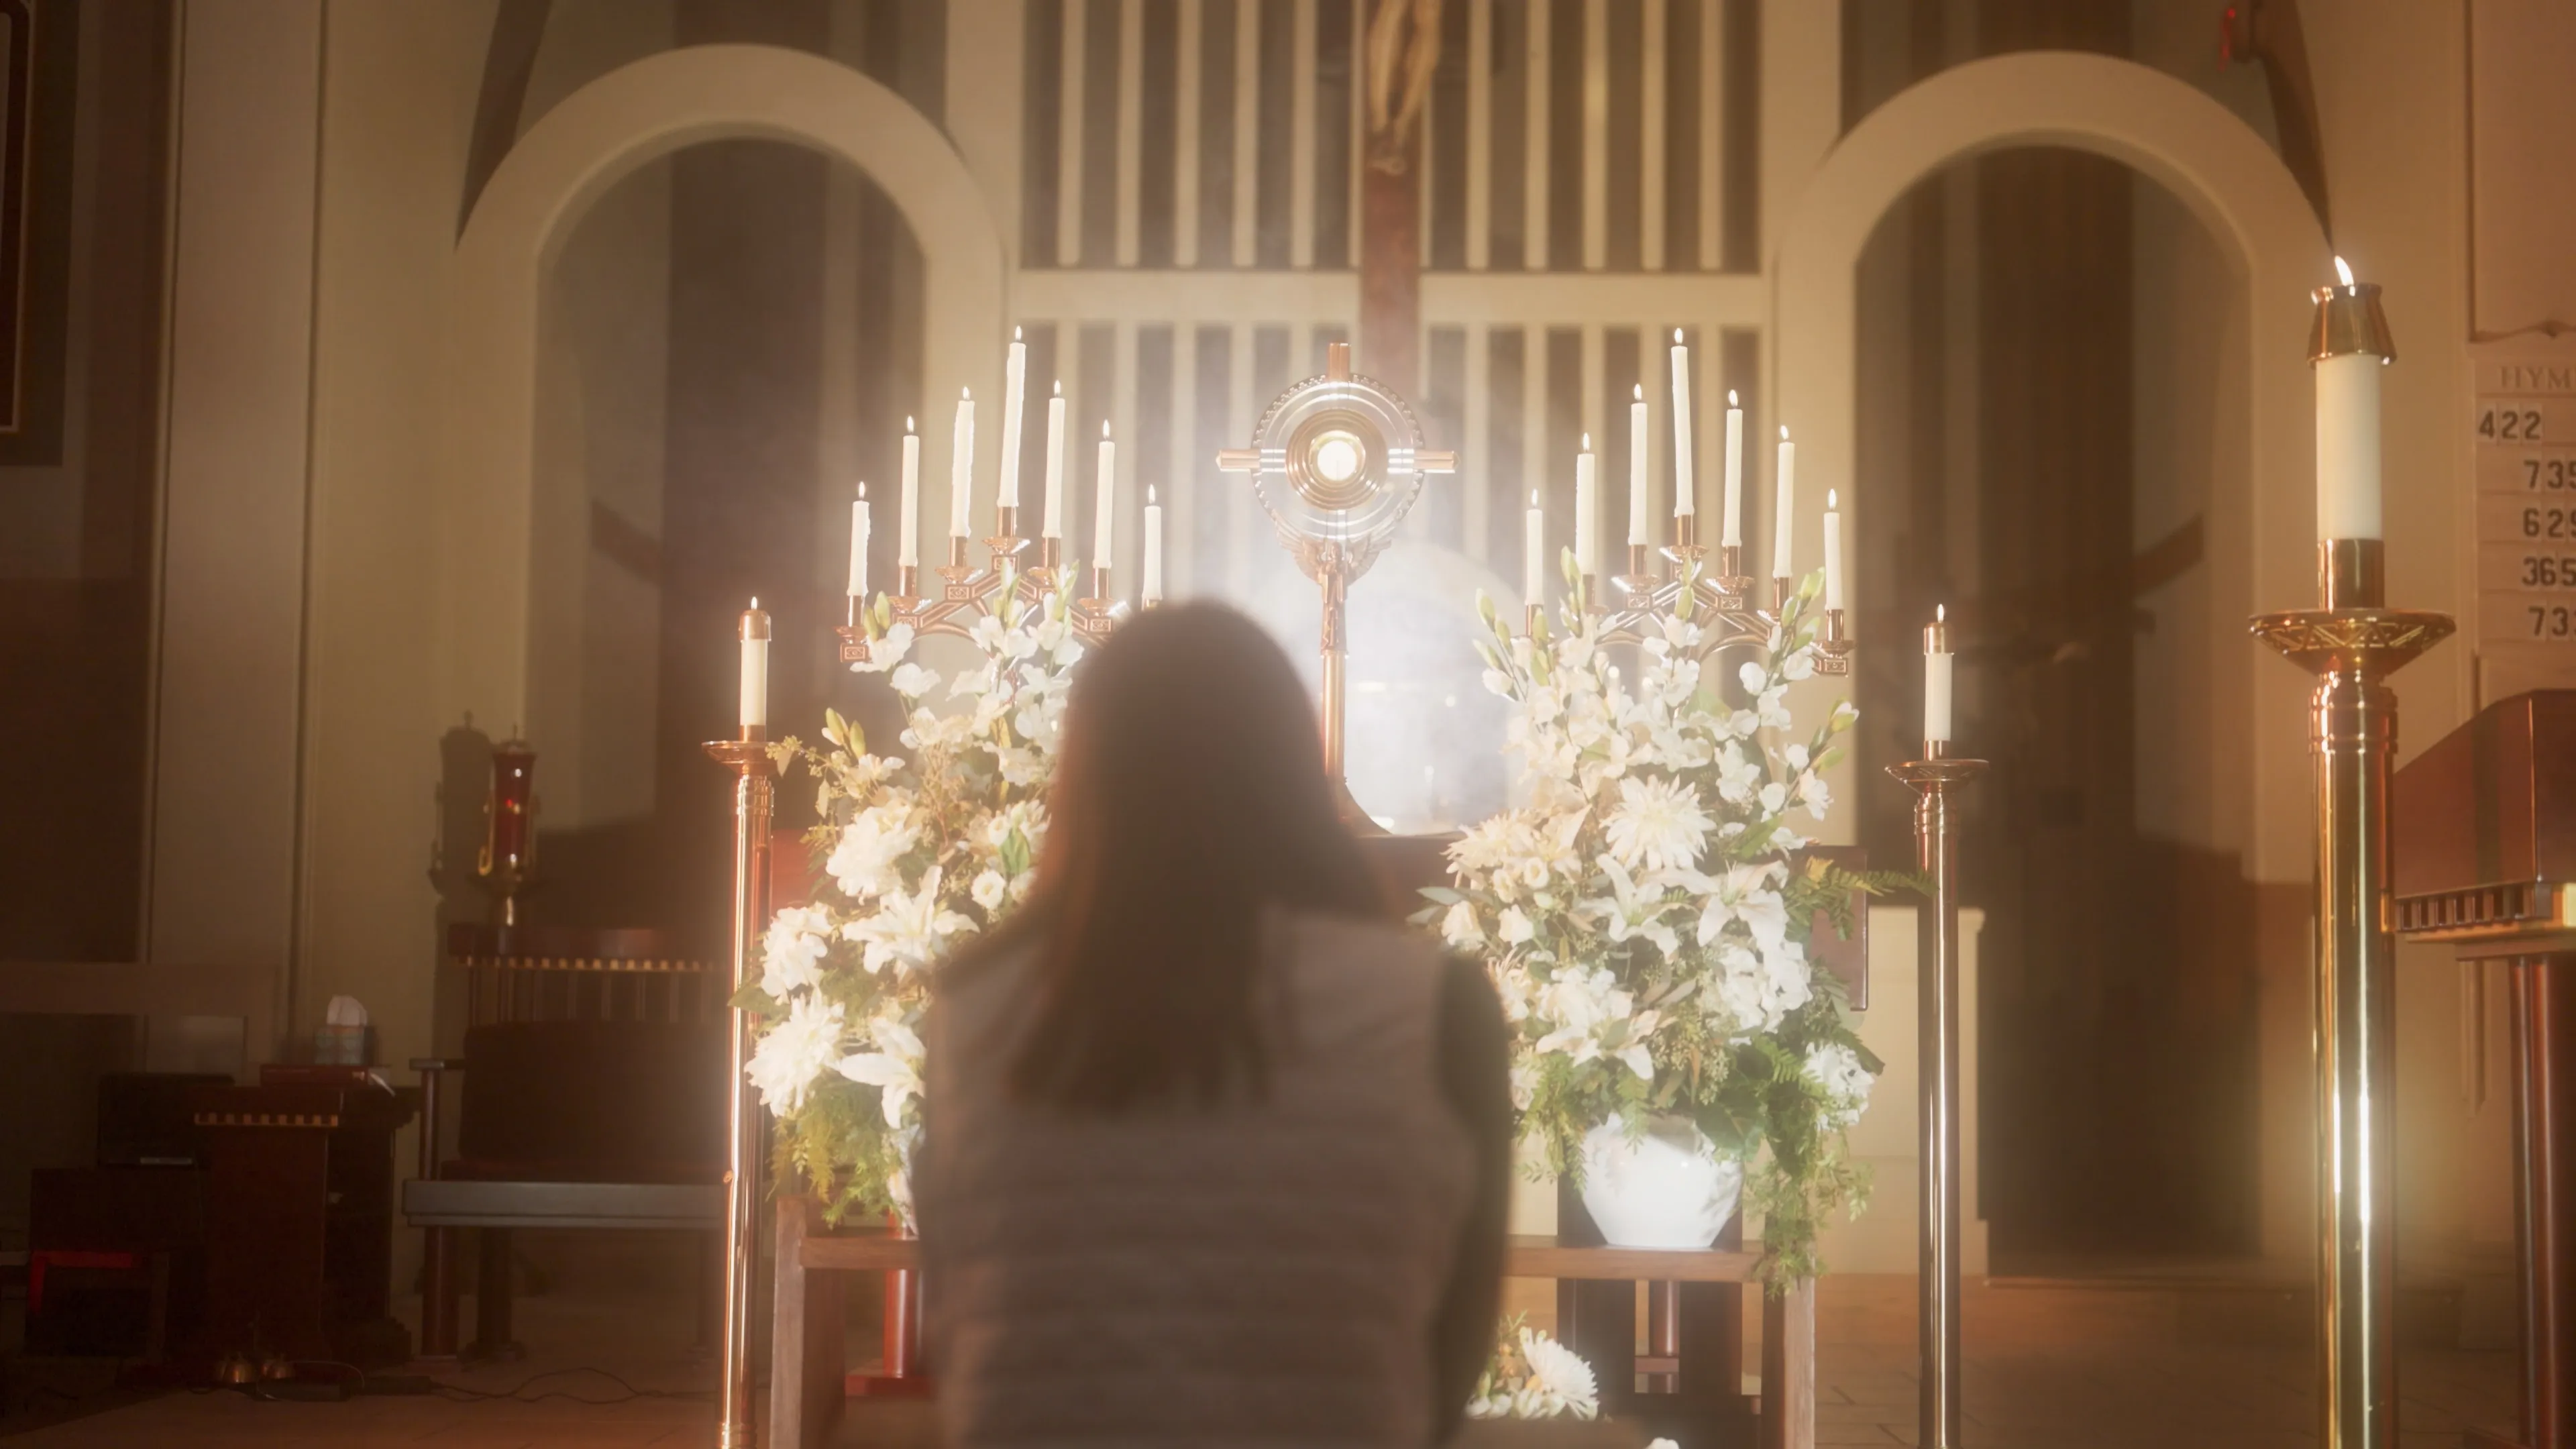 A scene from the "Silent Night" Christmas video from the Diocese of Lansing.?w=200&h=150